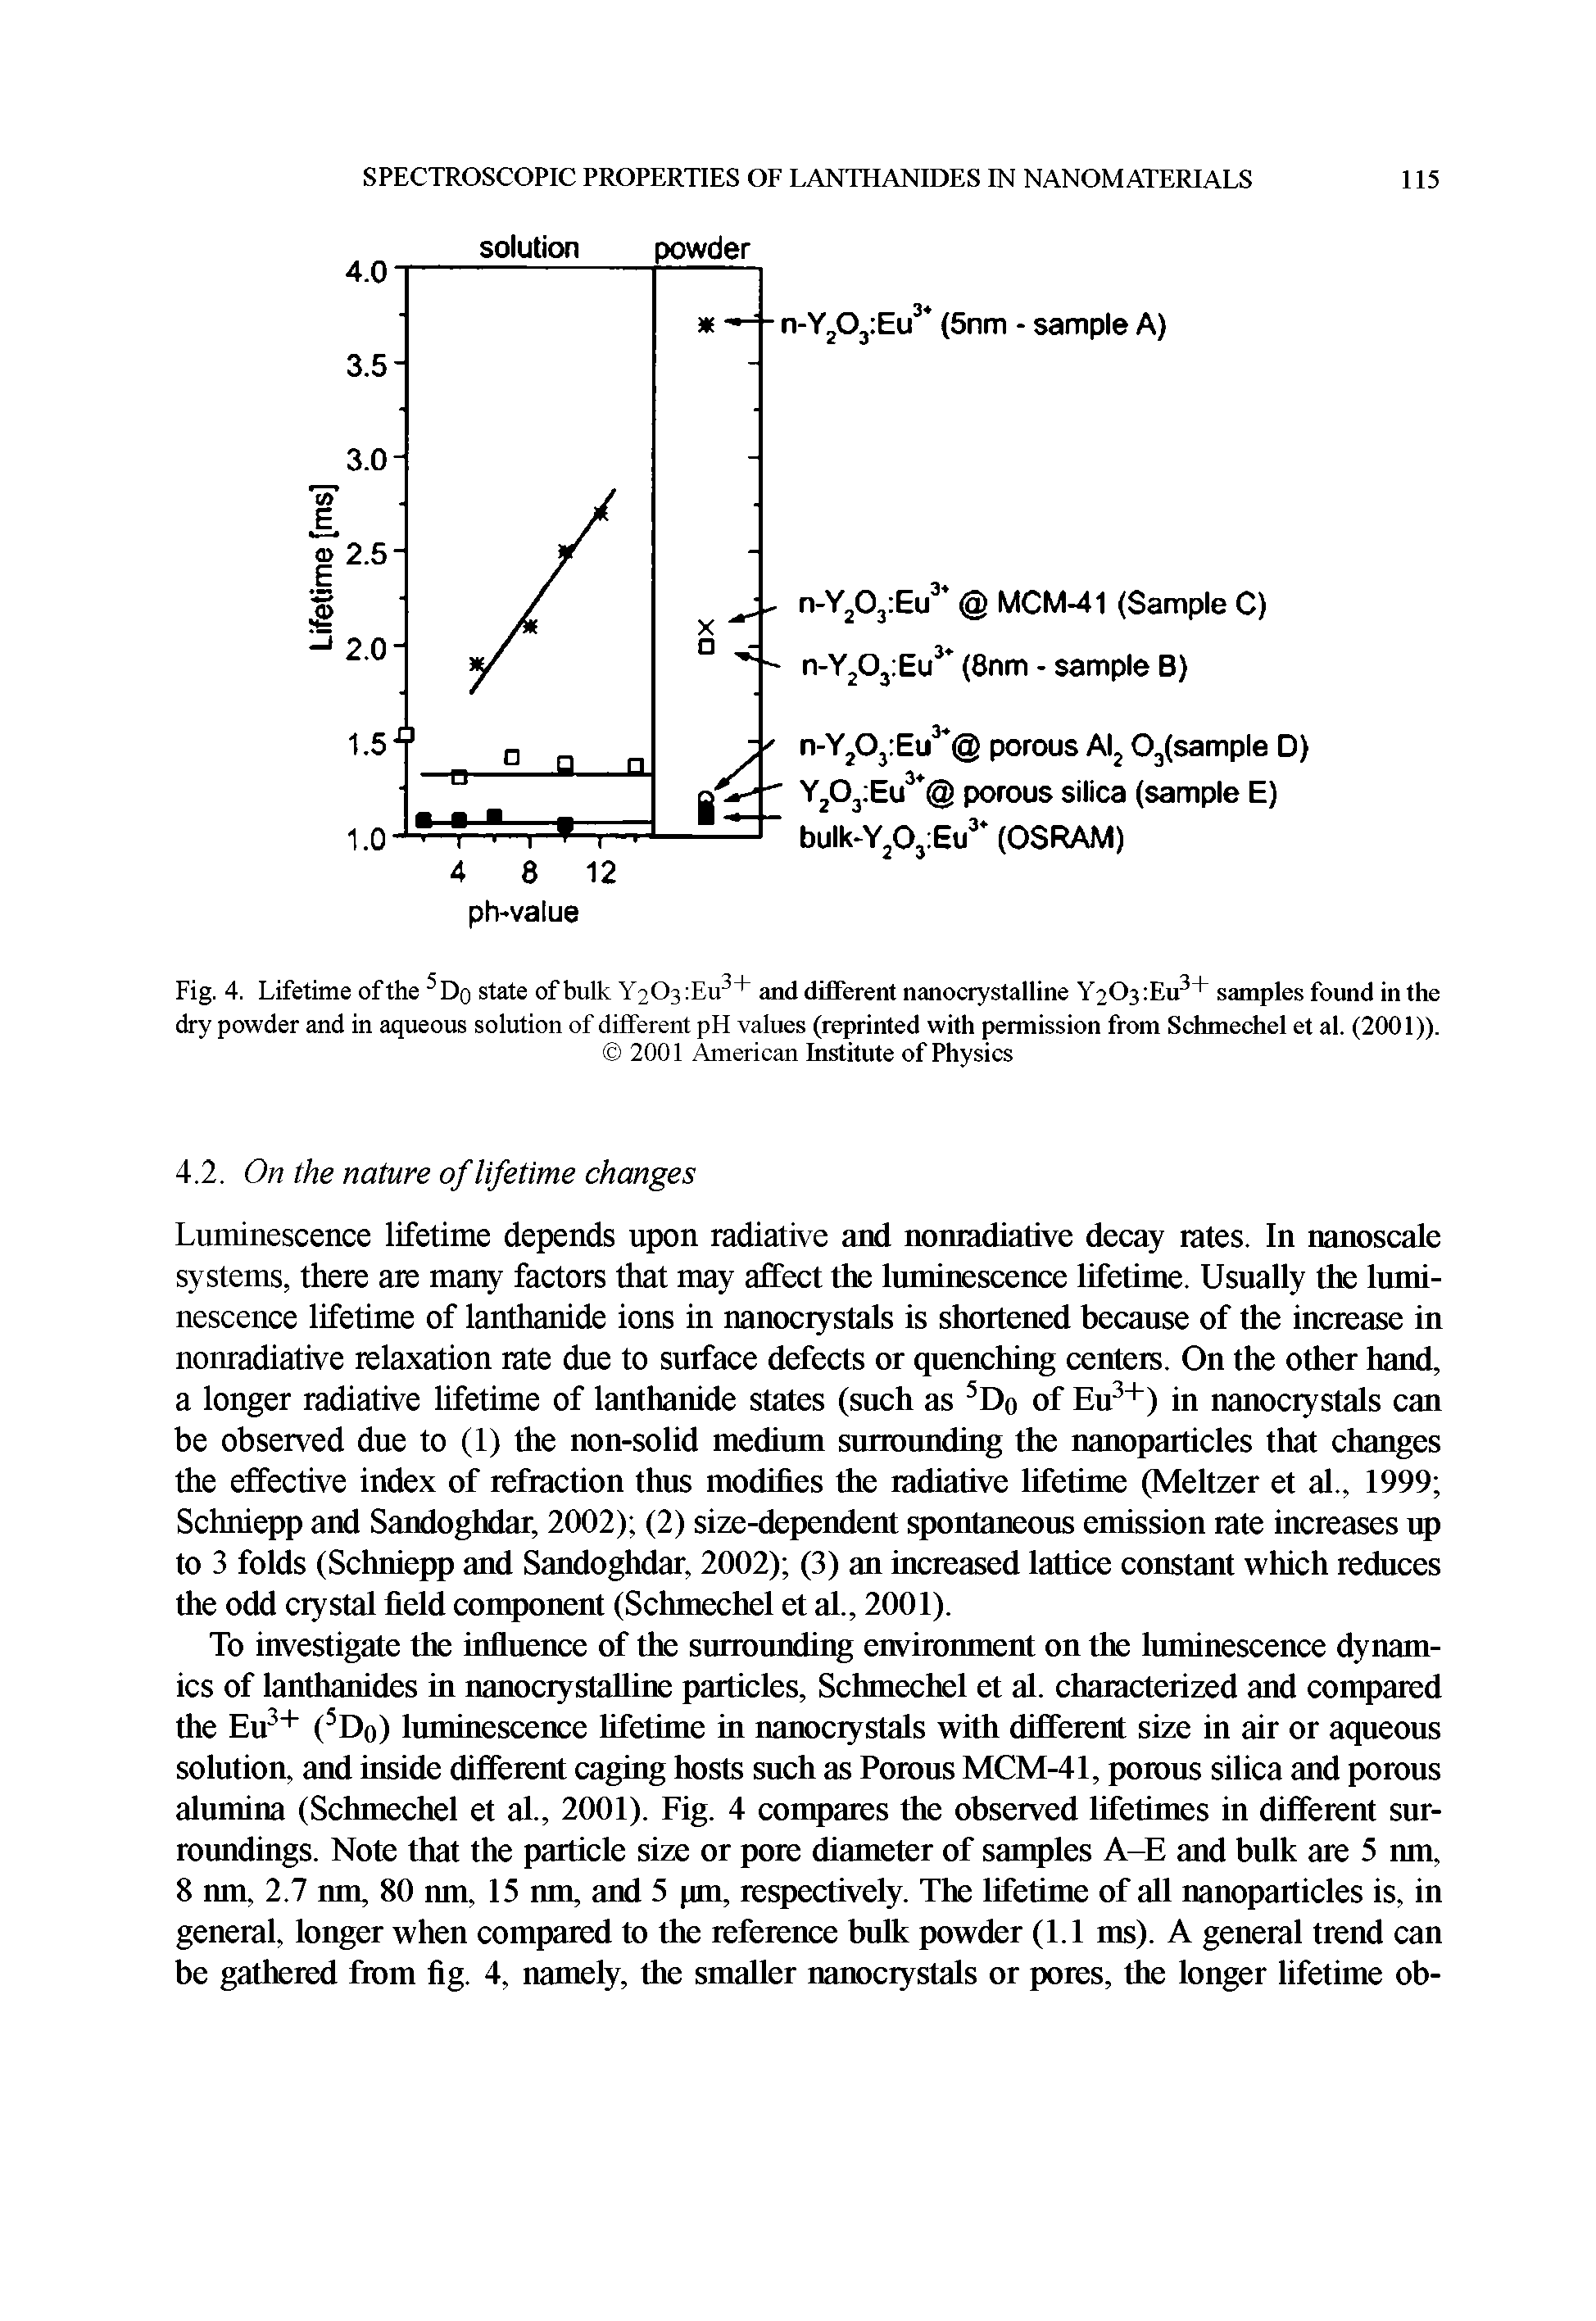 Fig. 4. Lifetime of the 5 Do state of bulk Y2C>3 Eu3+ and different nanocrystalline YoOvEu31 samples found in the dry powder and in aqueous solution of different pH values (reprinted with permission from Schmechel et al. (2001)).